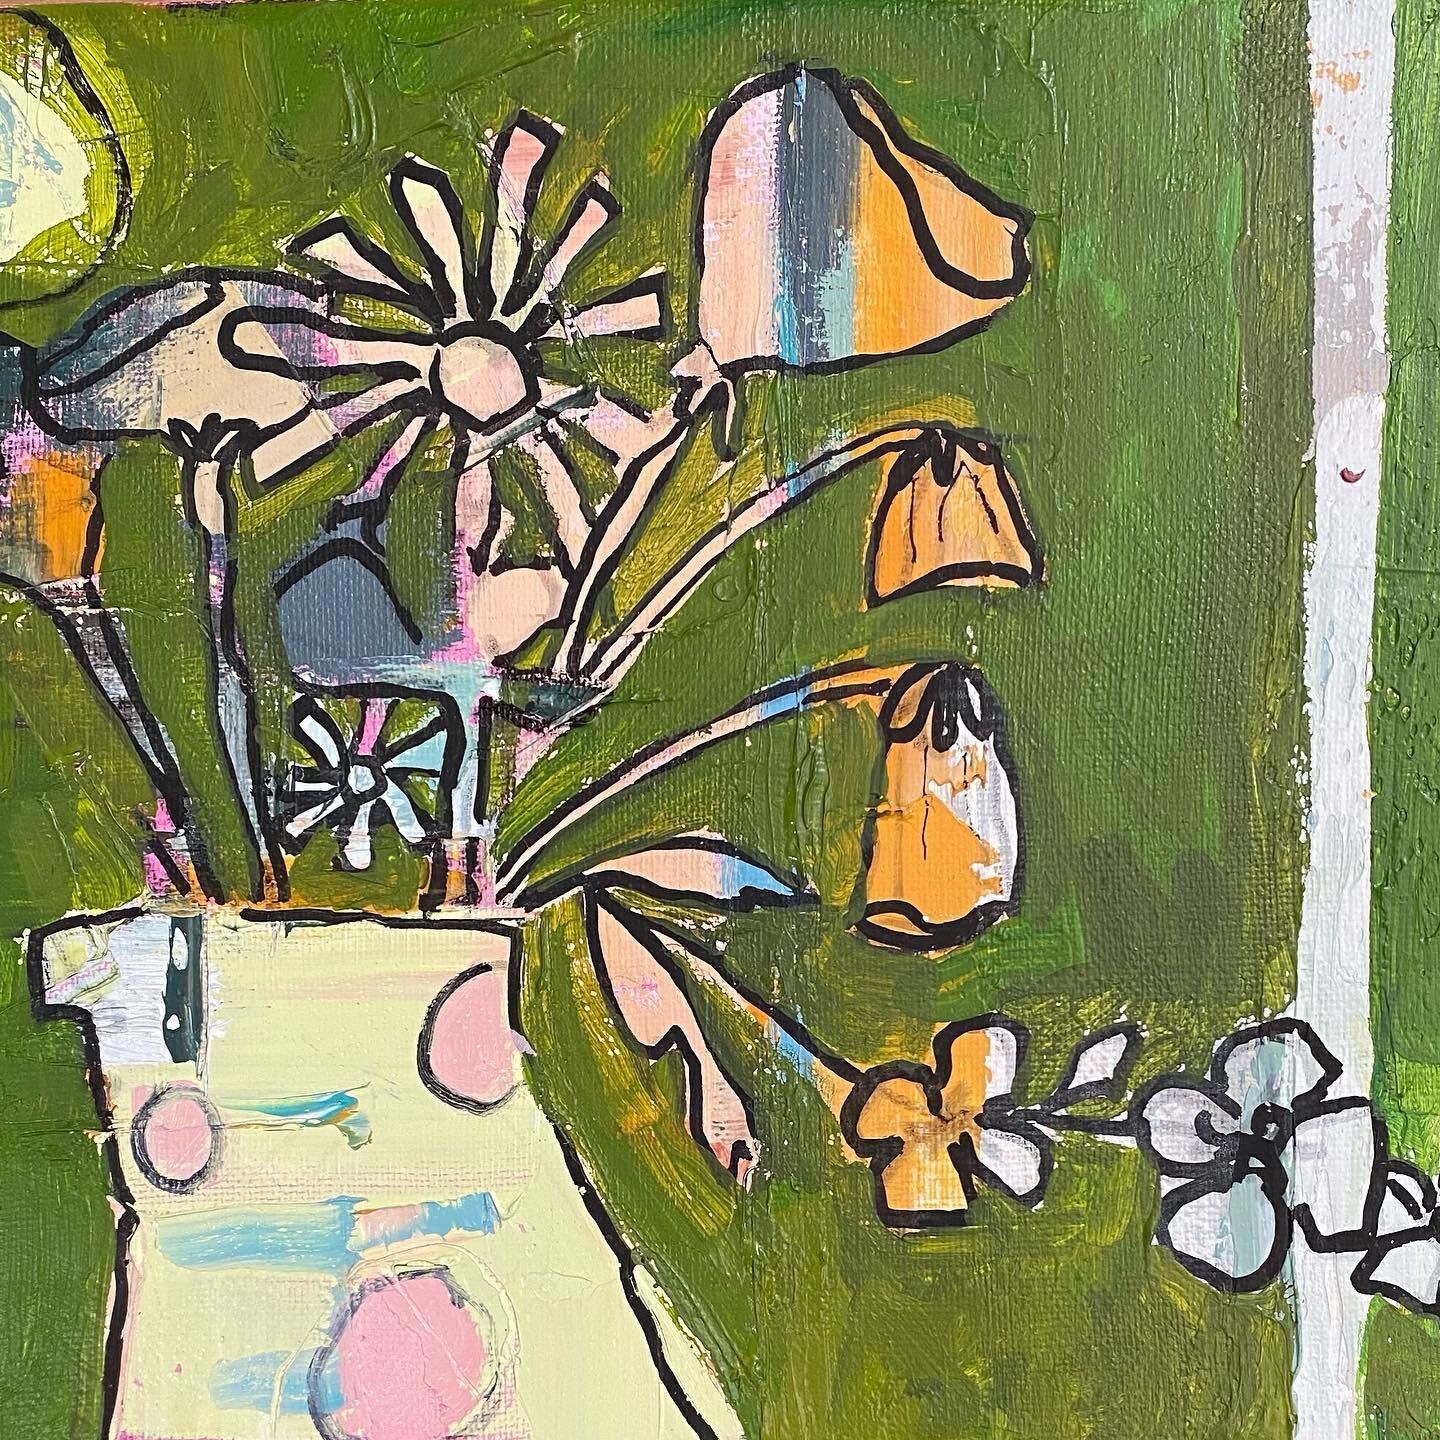 Funky Flowers. Trying all kinds of flowers  this week 7&rdquo; x10&rdquo; acrylic on canvas #flowers#funkyflowers#flowersinvase #flowersaregoodforthesoul #flowersofinstagram #flowers_andlife #funkyart #funky